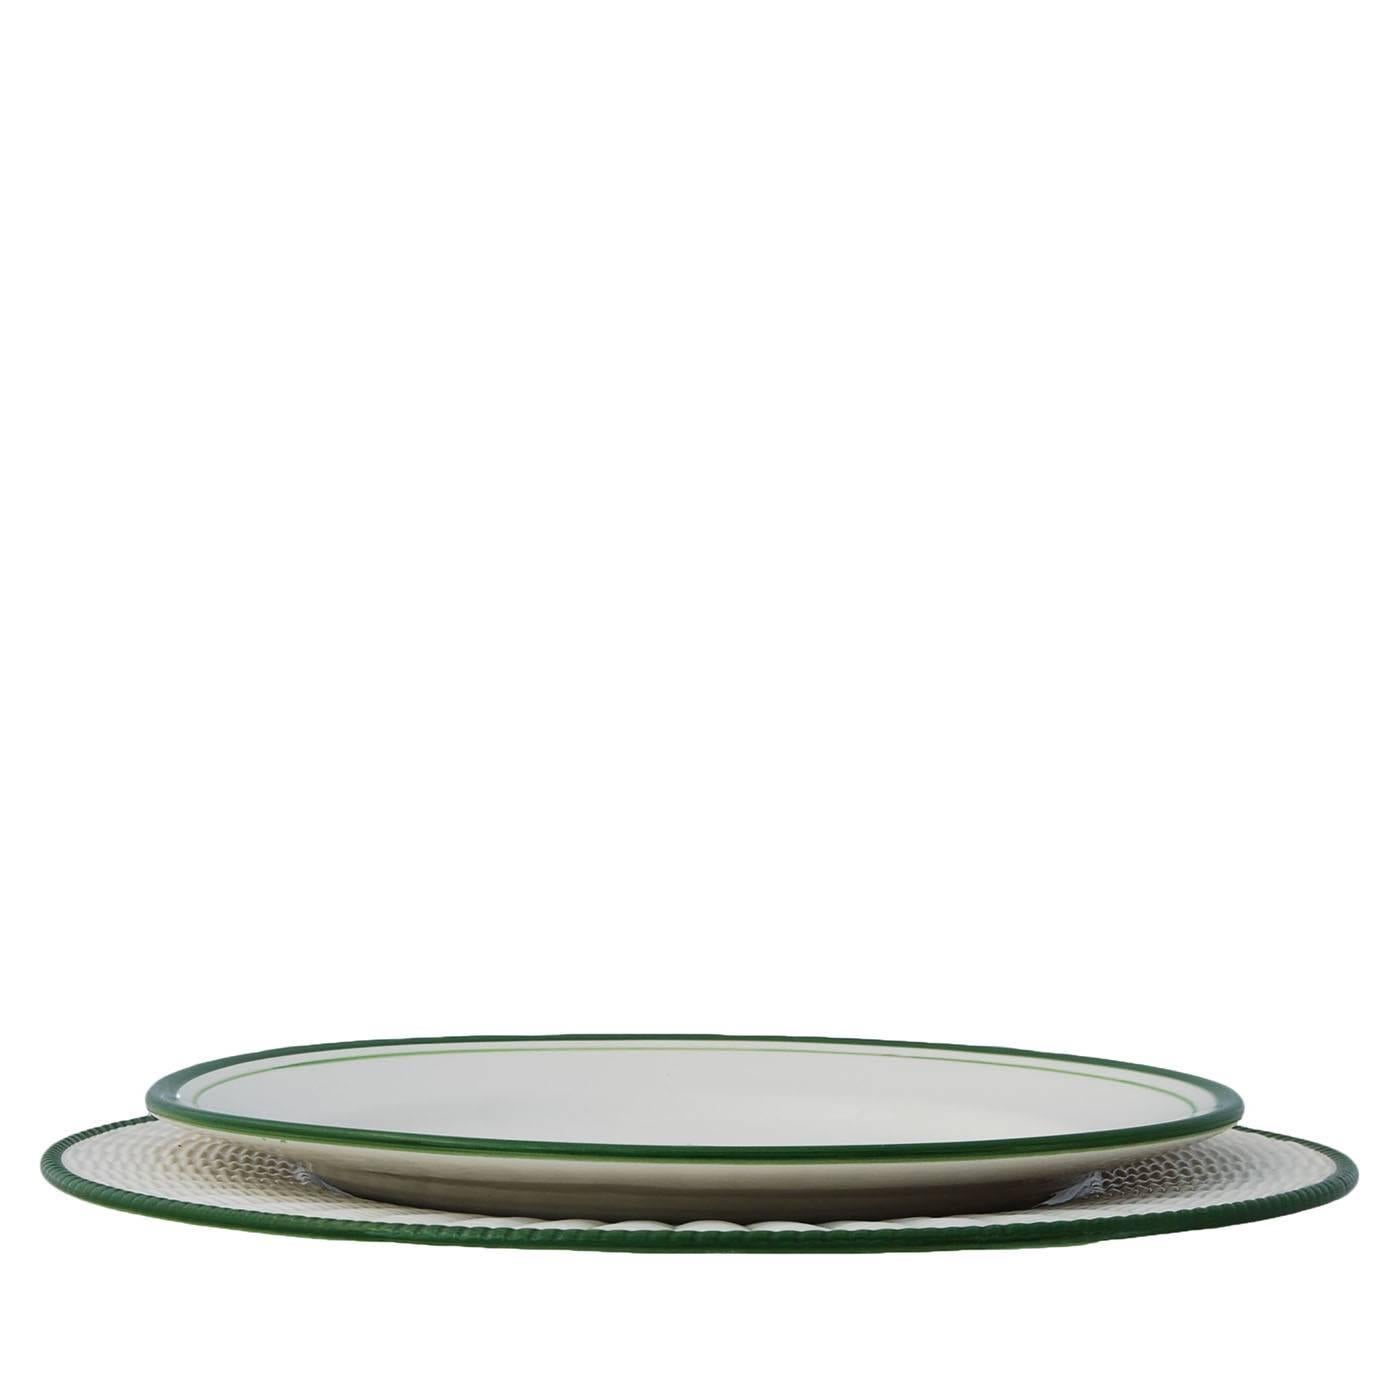 An elegant white background contrasts with the verdant topiary shrubs hand-painted on the ceramic set of eight plates. The wicker placeholder is white with a green border.